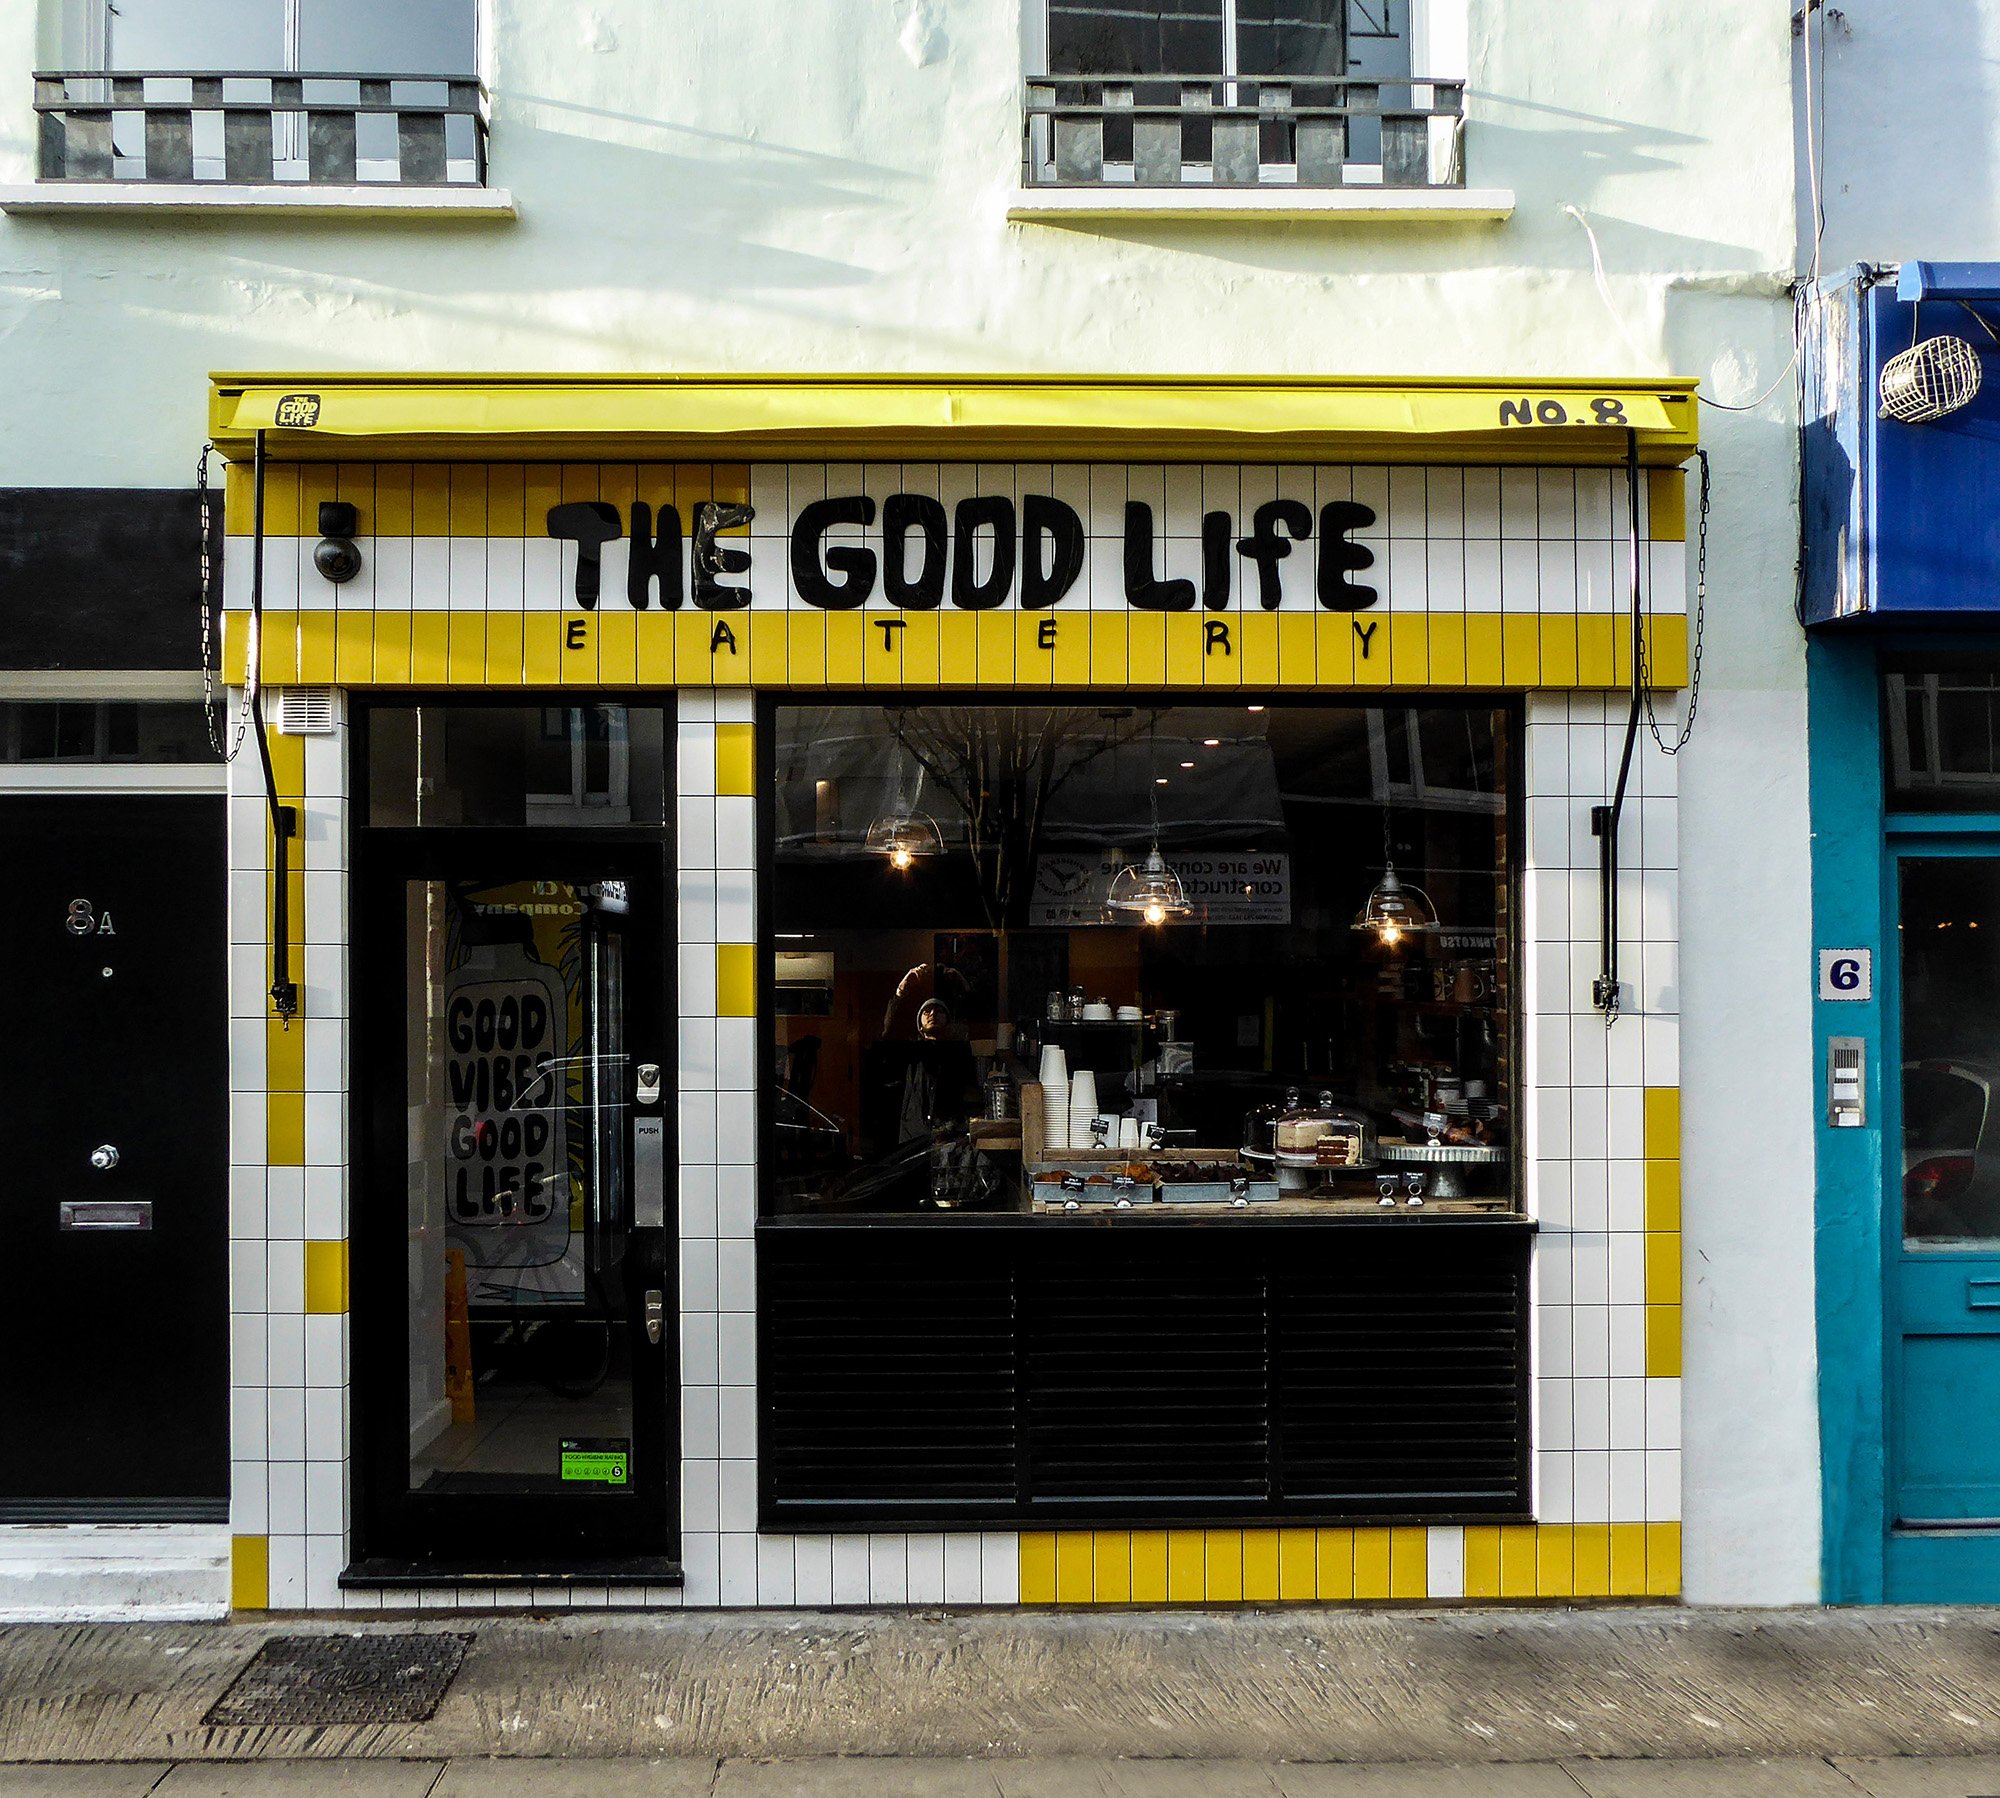 The Good Life Awning closed